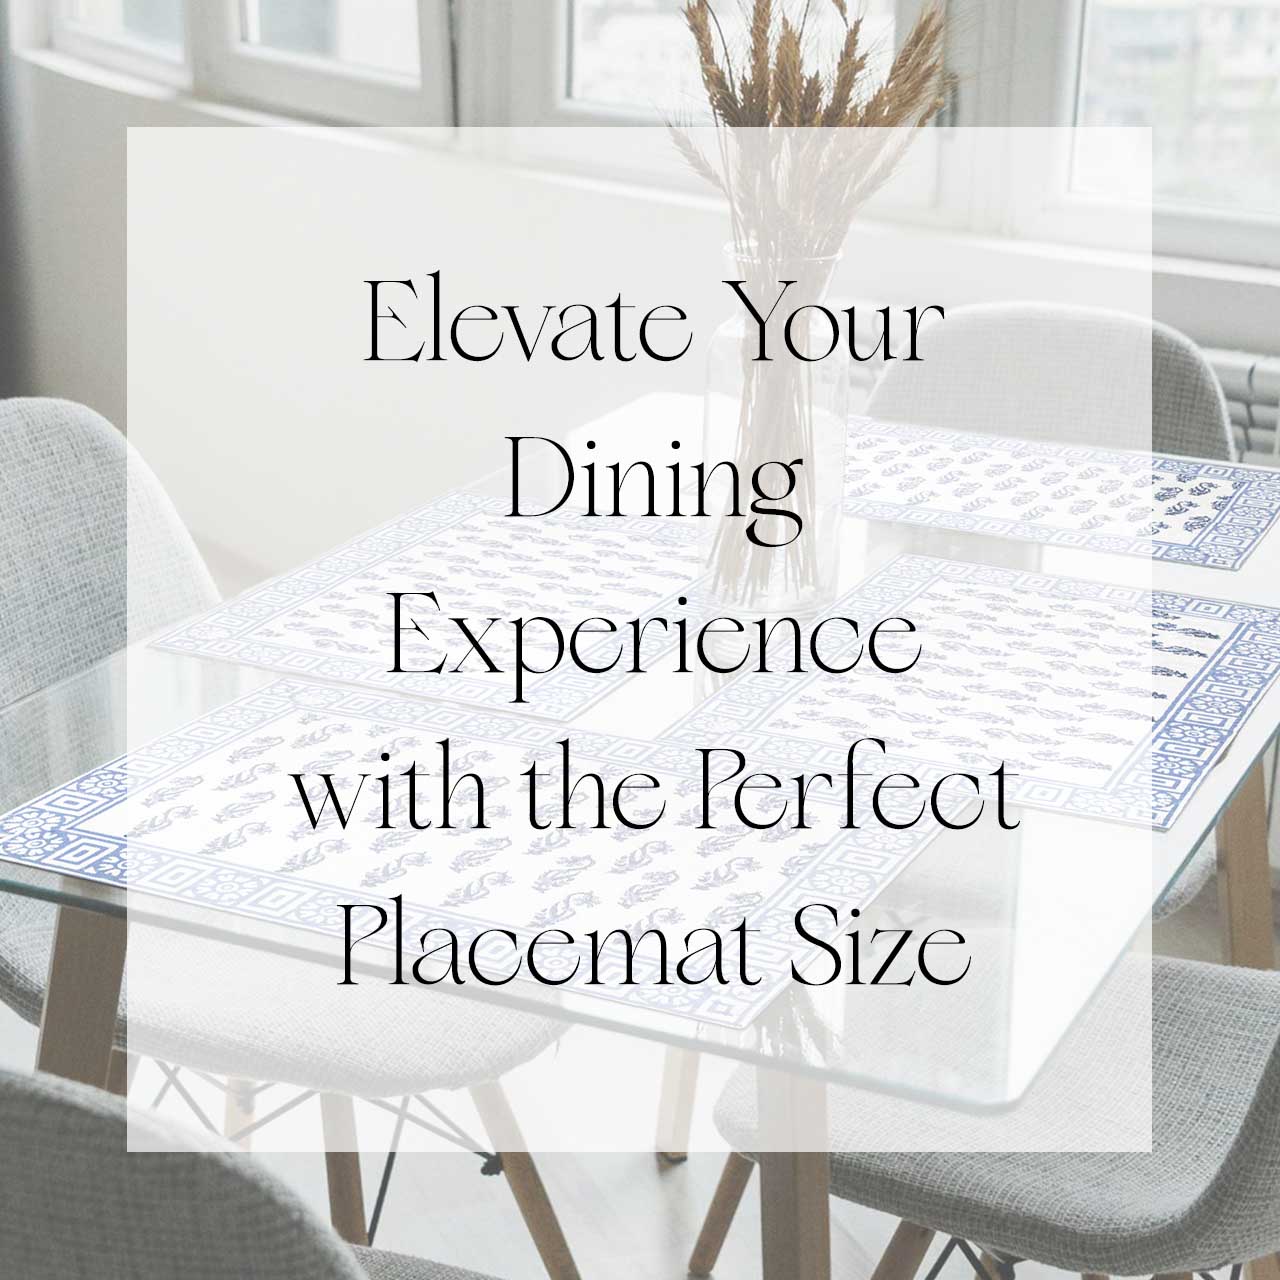 Elevate Your Dining Experience with the Perfect Placemat Size